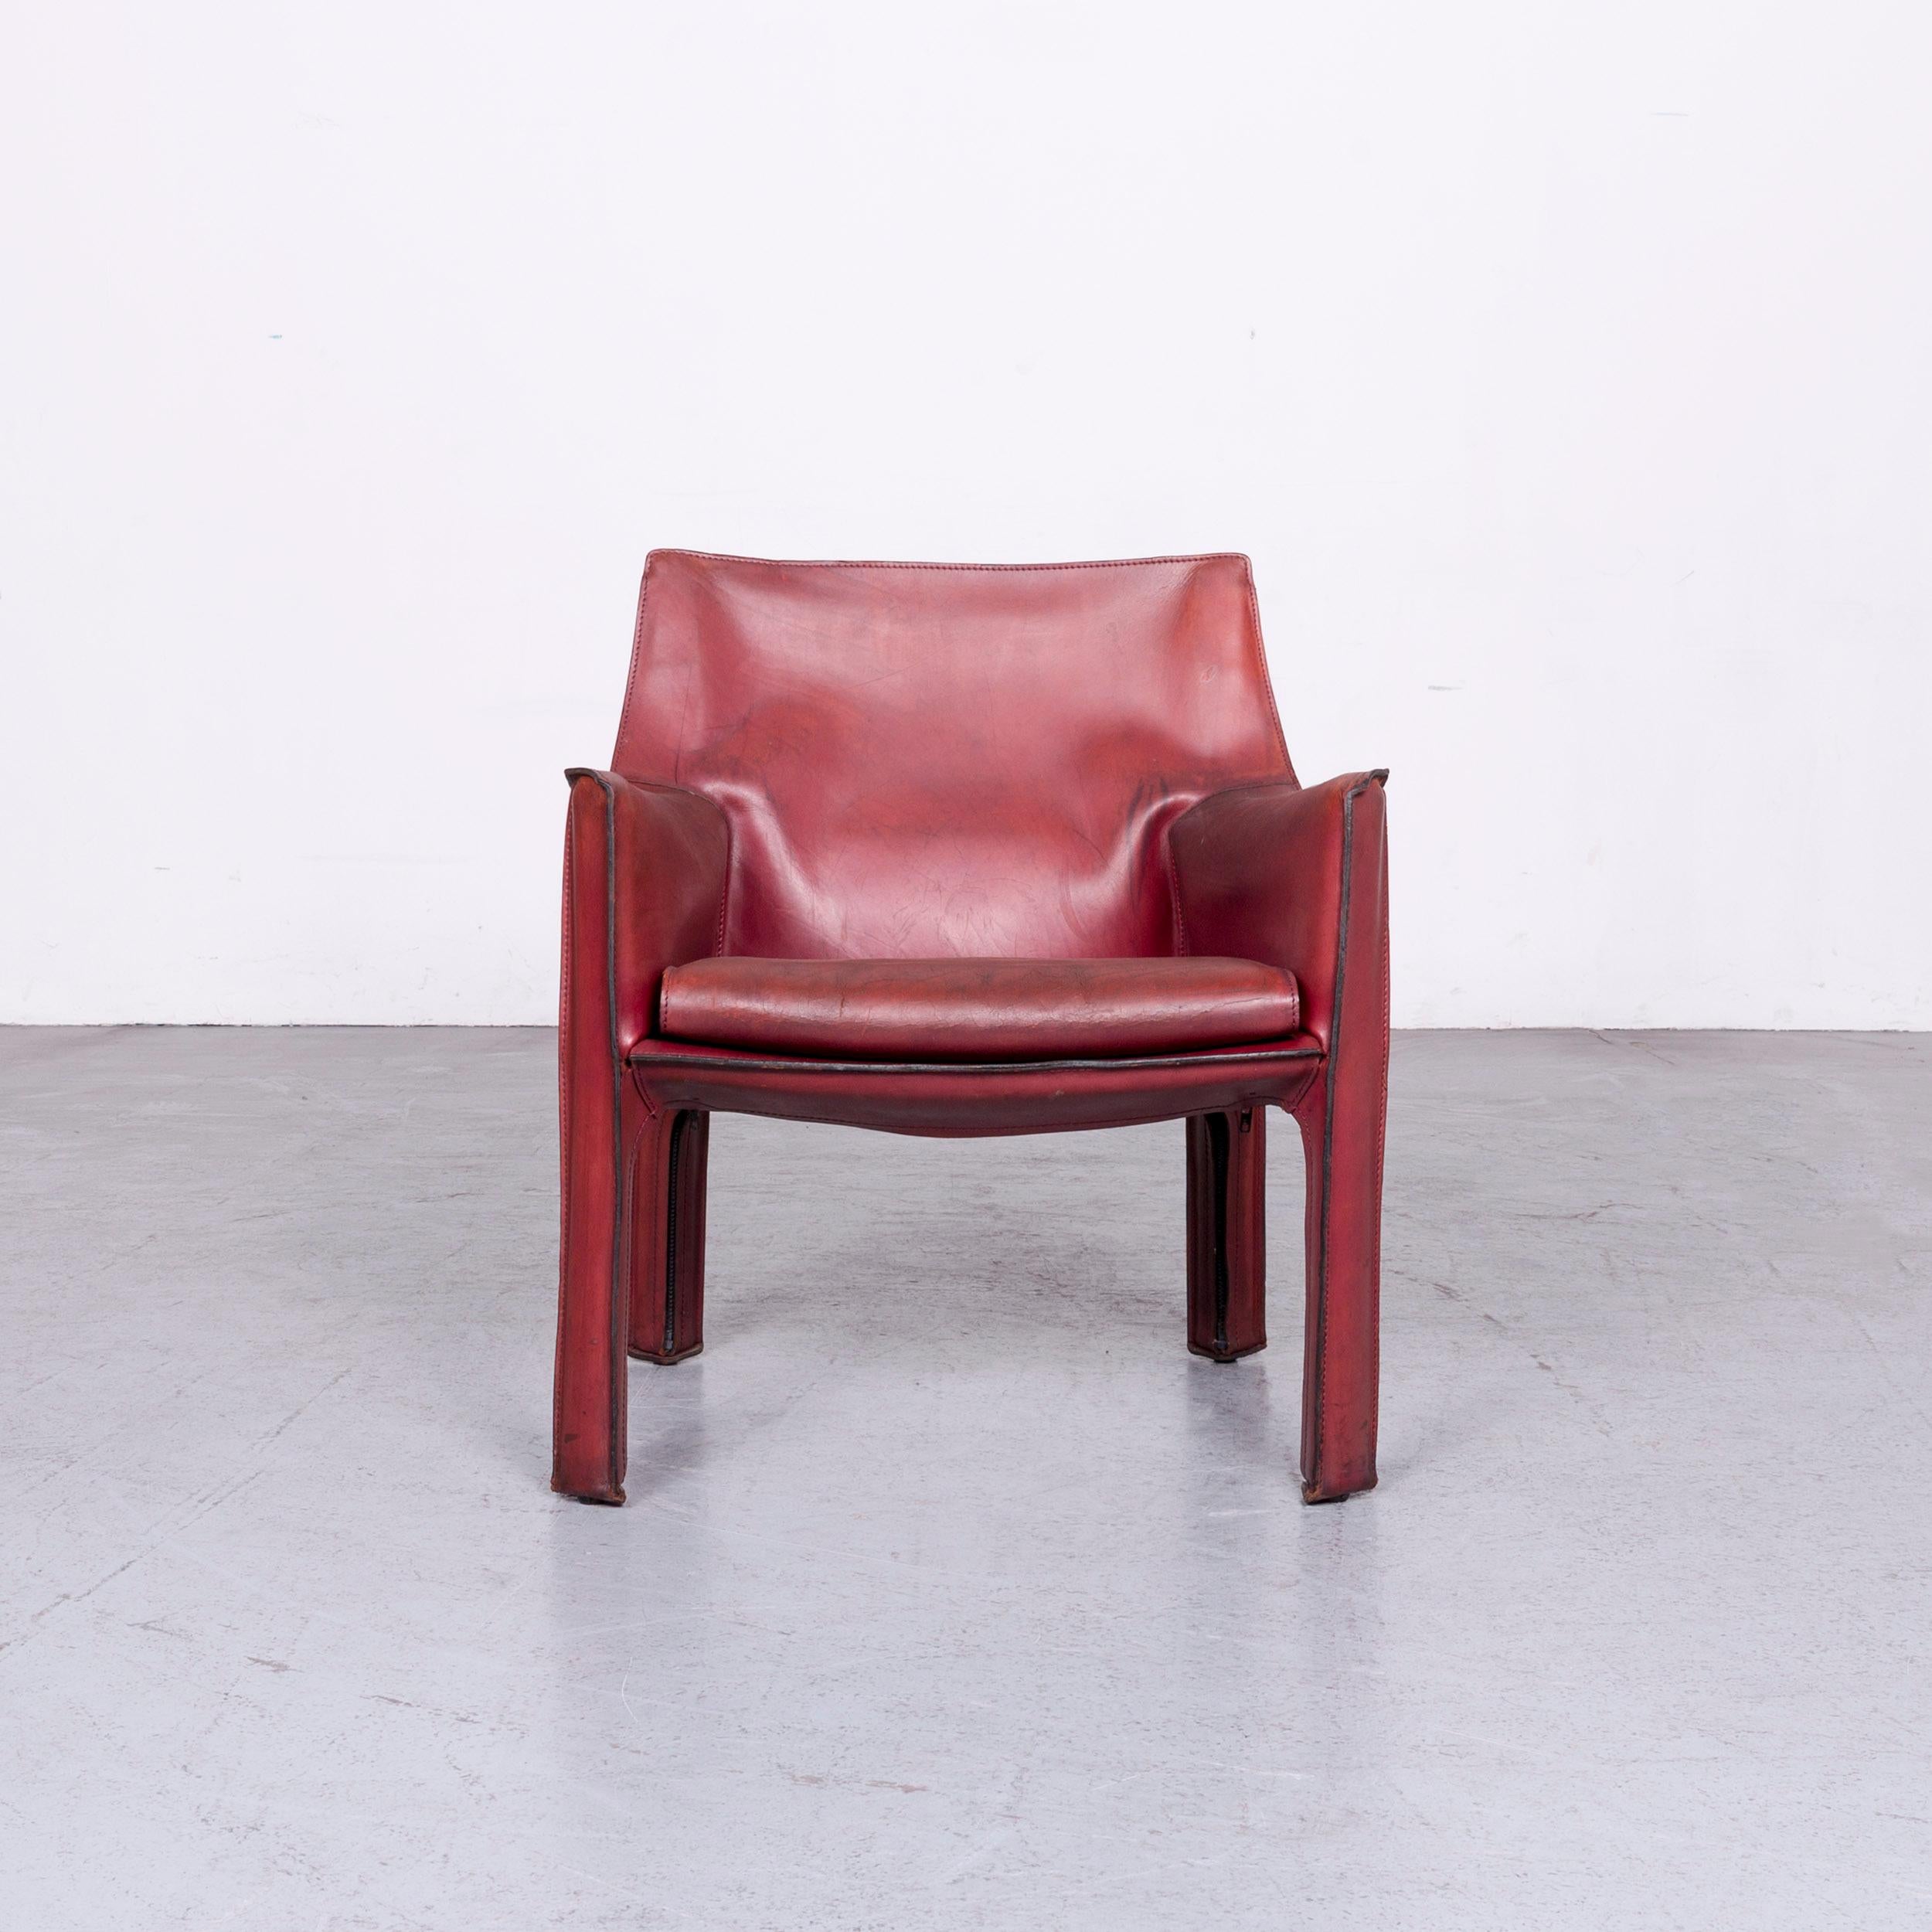 We bring to you a Cassina Cab 414 Vintage Leather Armchair Red by Mario Belinni 1970-1979